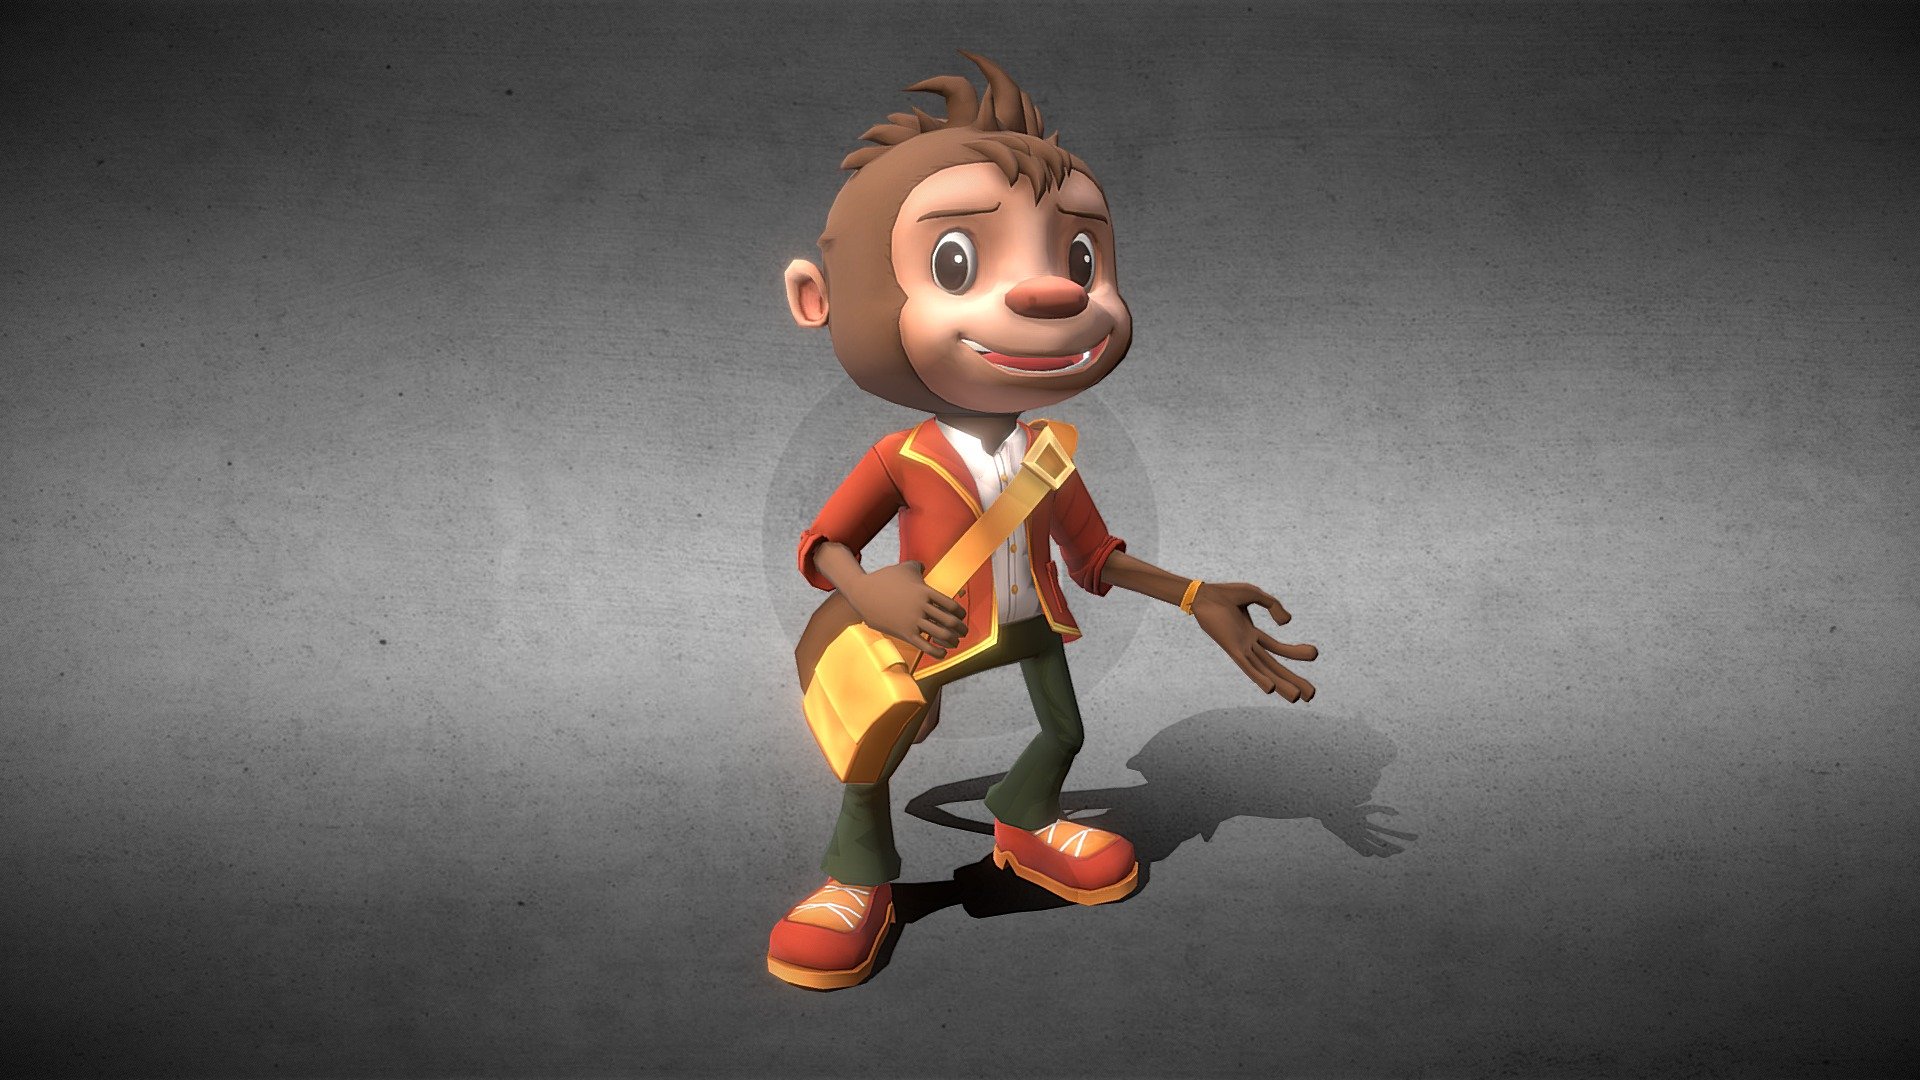 Characters made for an unpublished AR mobile app - Bamboo_Monkey - 3D model by Success Sky (@Ricky.at.SuccessSky) 3d model